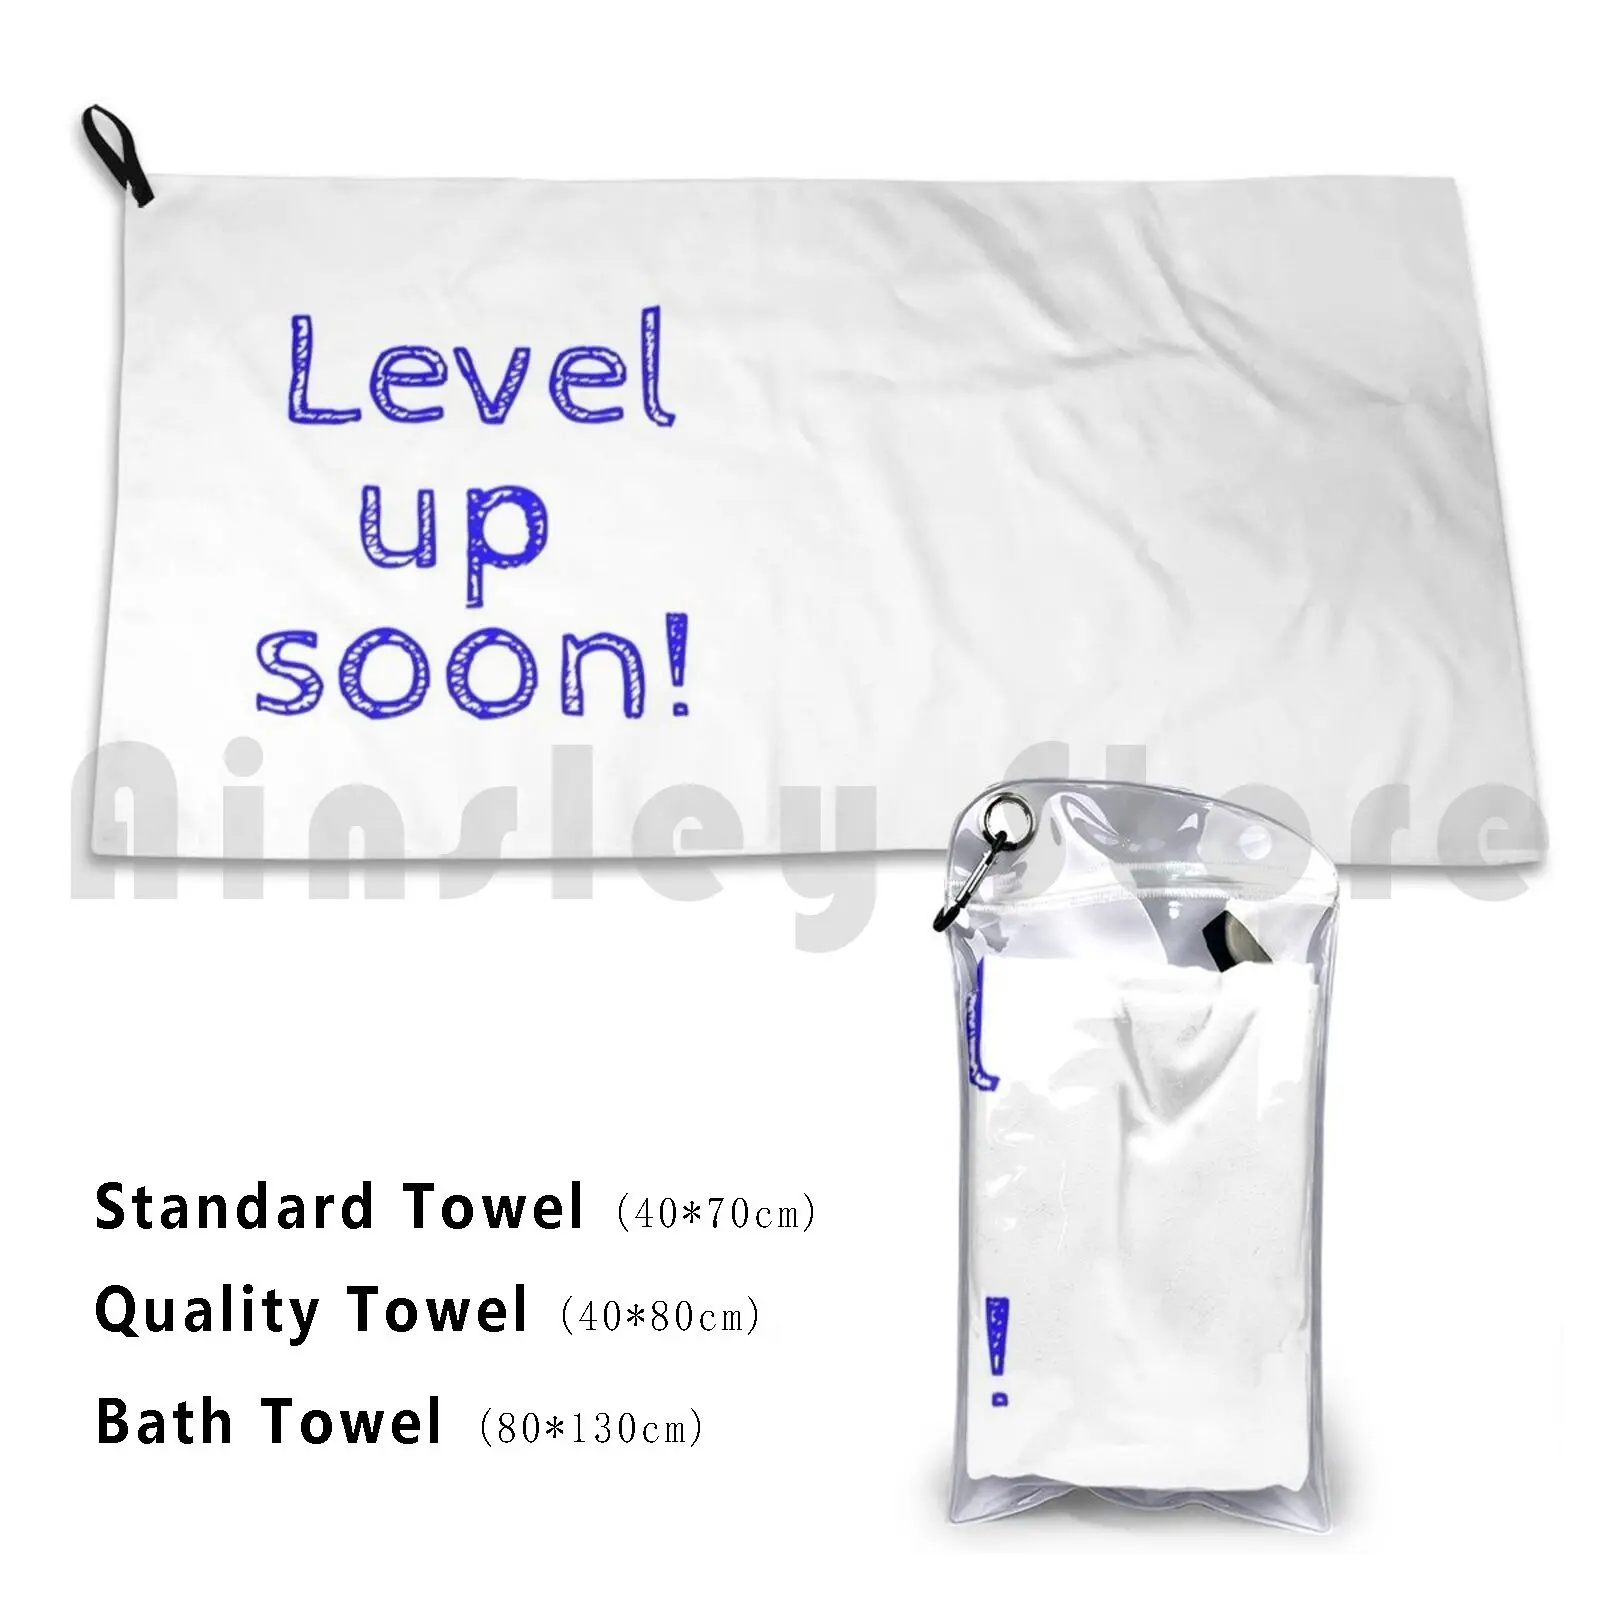 Level Up Soon! Bath Towel Beach Cushion Level Up Soon Level Stand Up Speak Up Voice Ages Juniors Funds